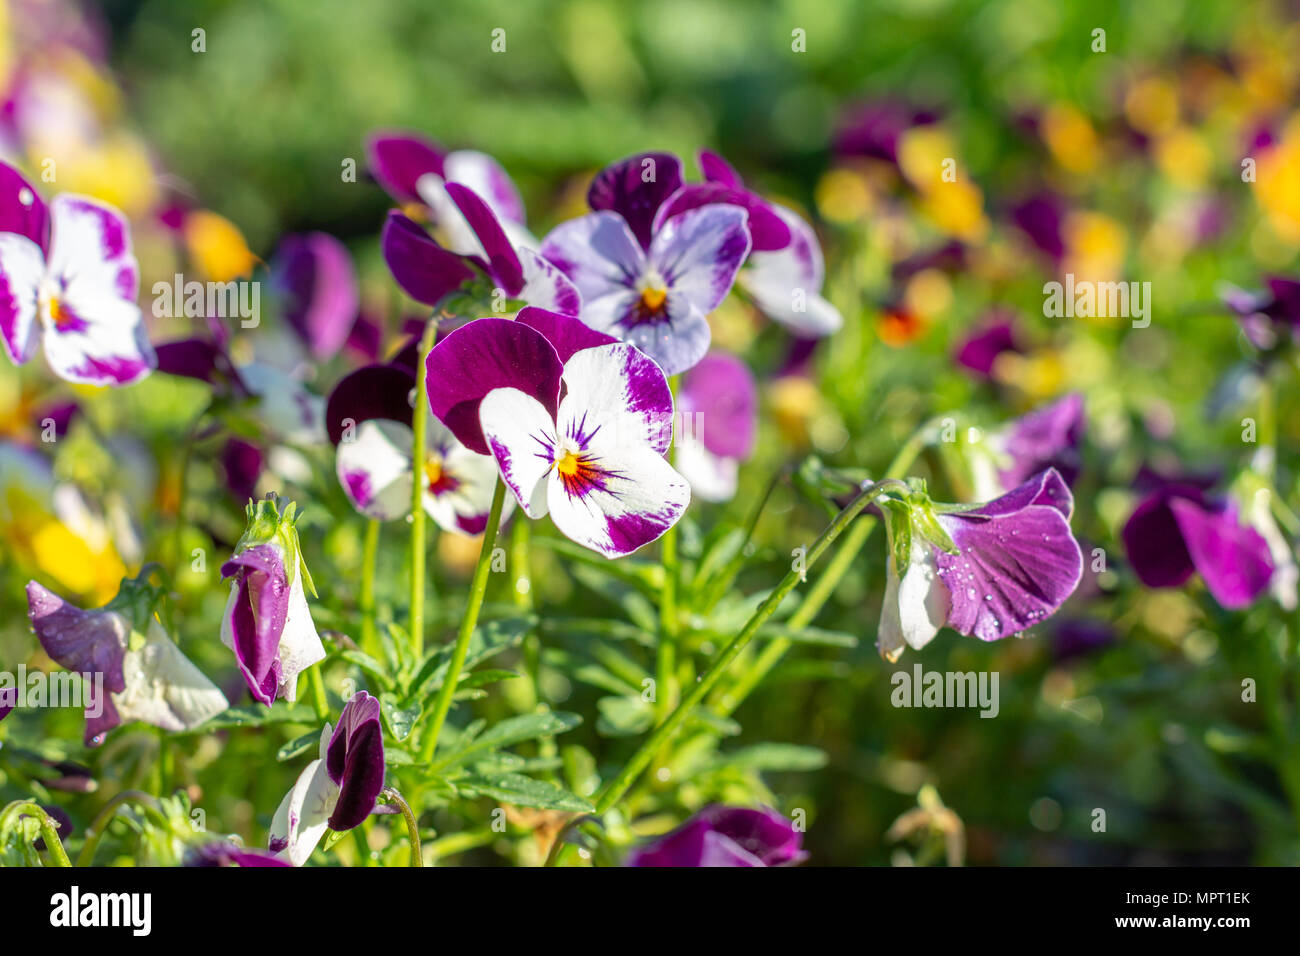 a pansy bed in different beautiful colors Stock Photo